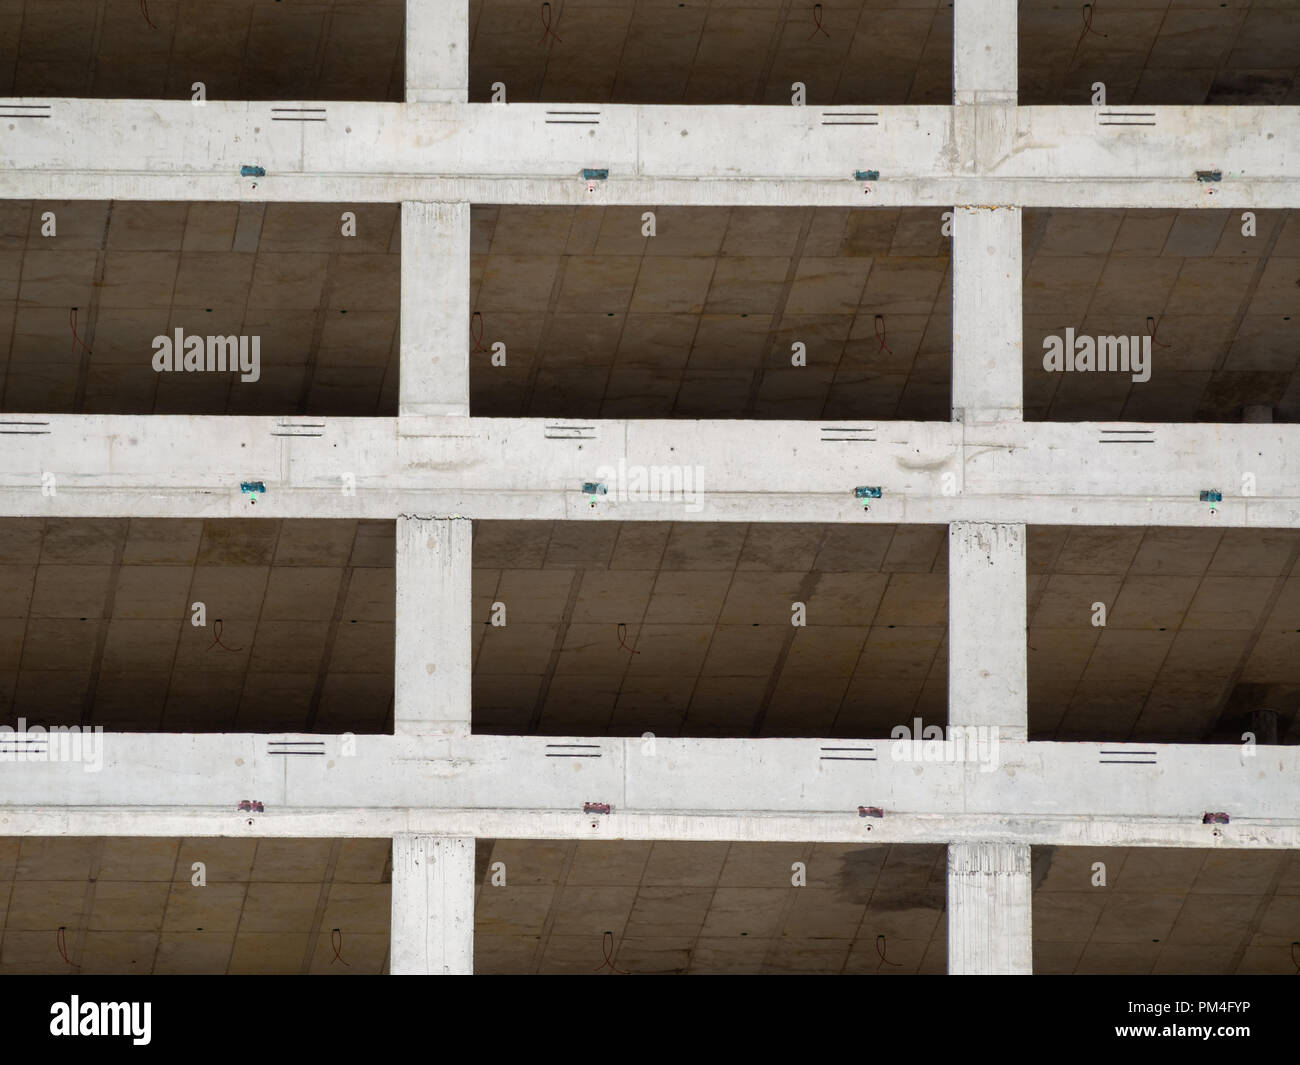 View at several floors of shell construction from below at day. Stock Photo